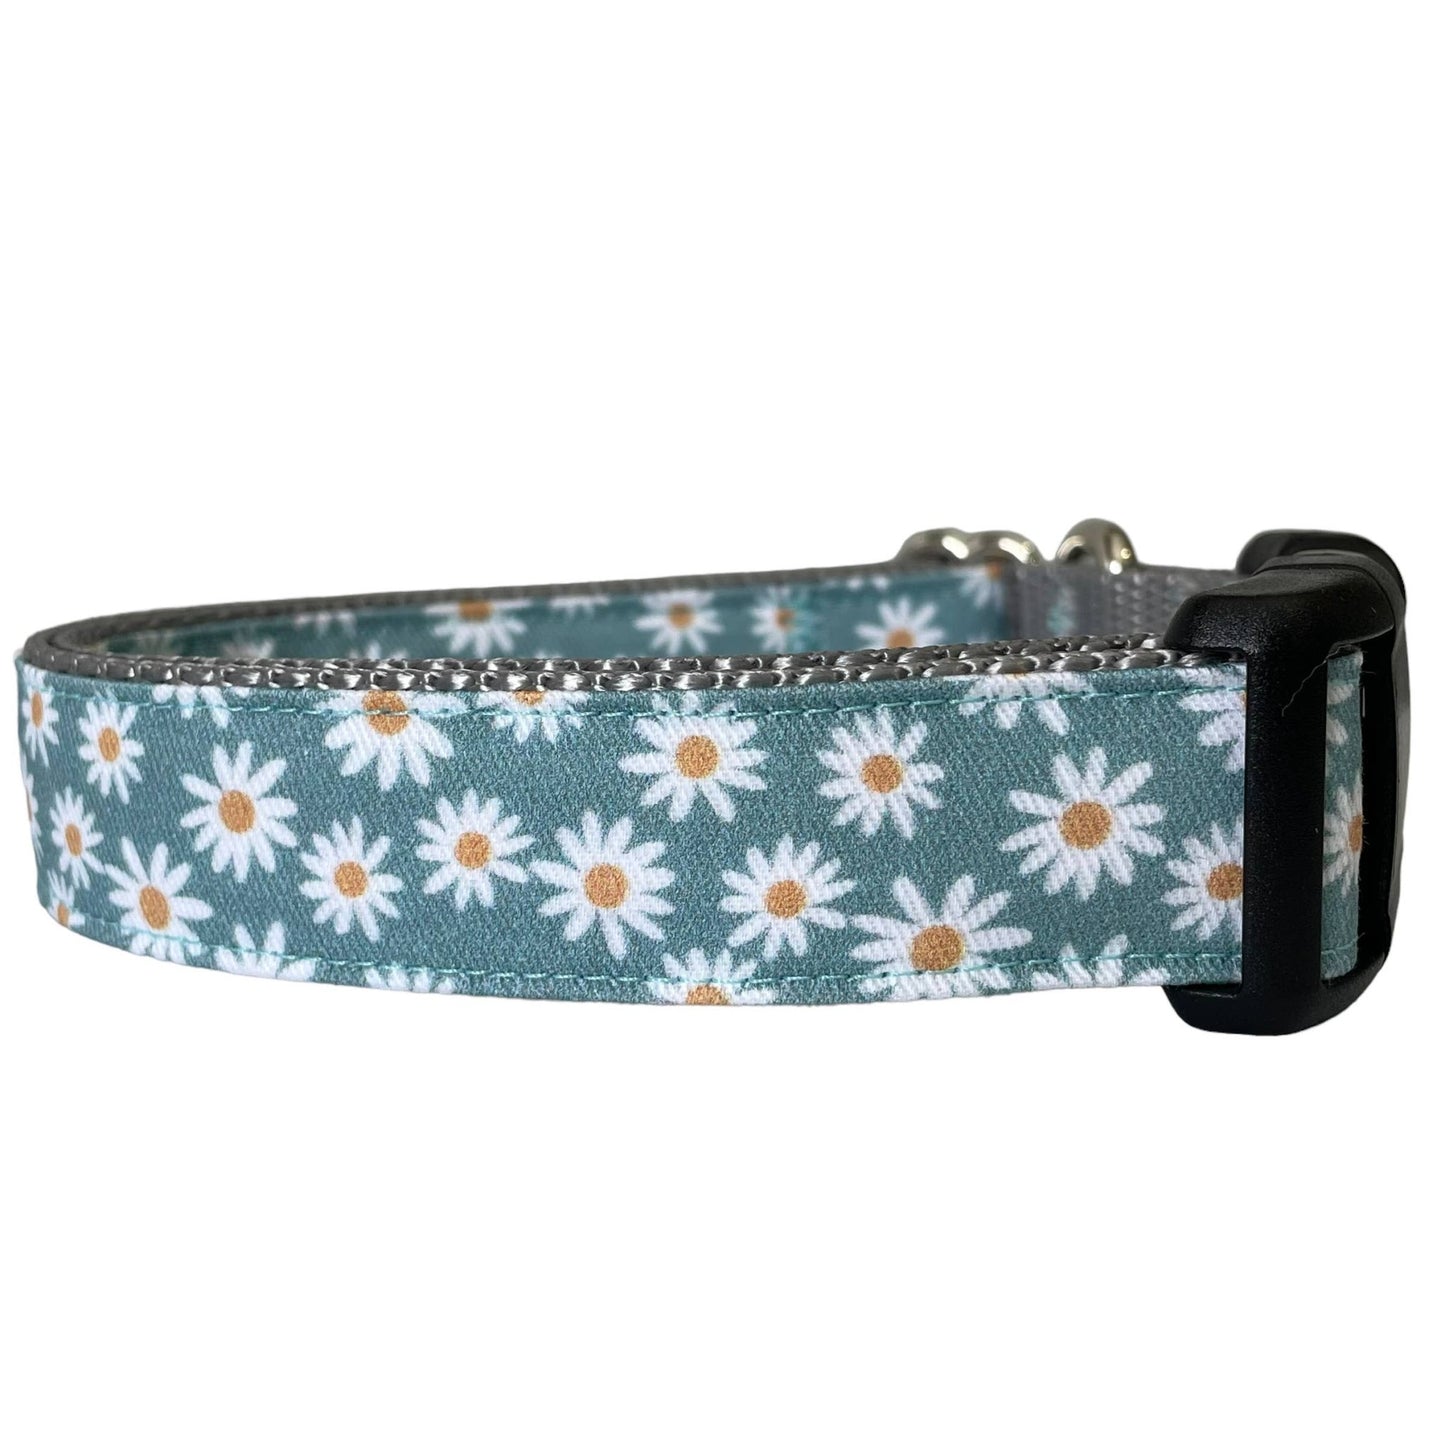 Sew Fetch Dog Co - Daisy Dog Collar in Dusty Blue Floral - Happy Hounds Pet Supply